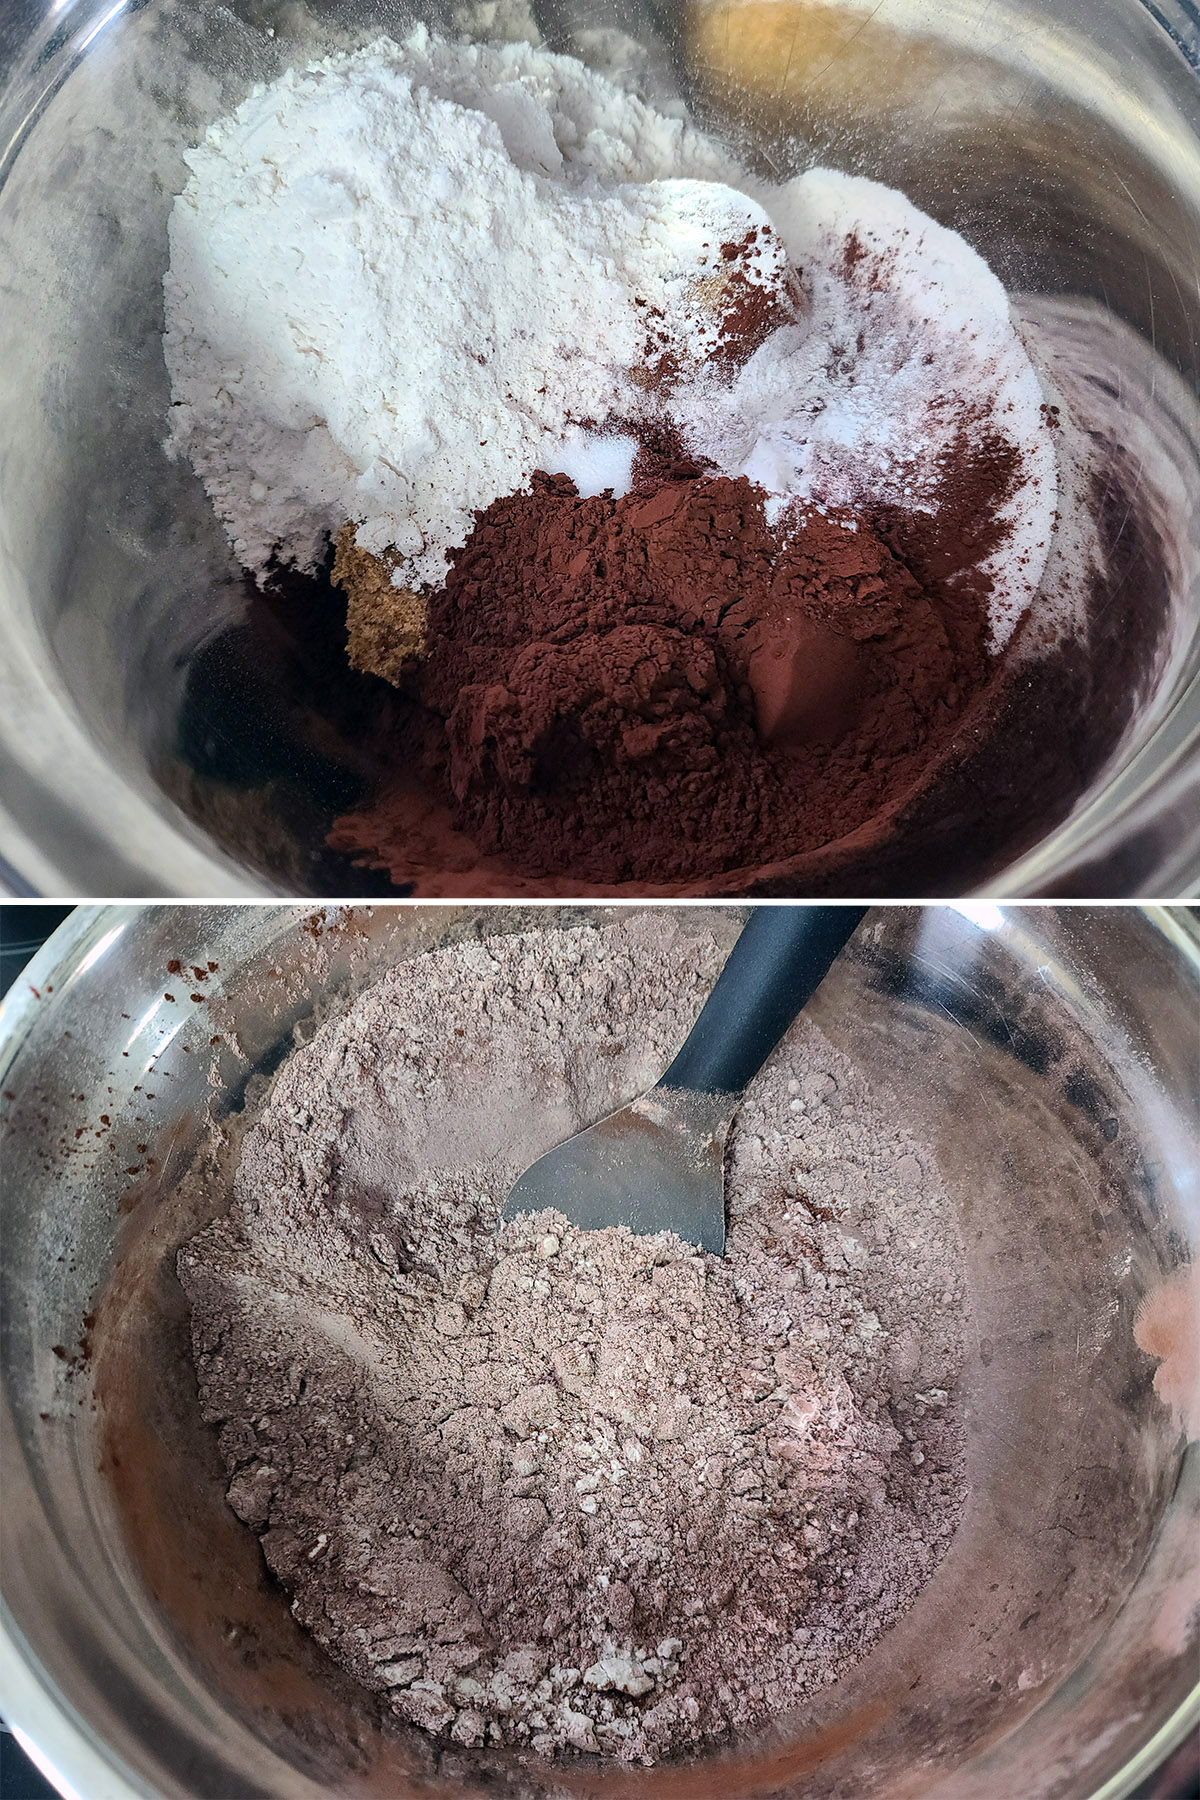 A 2 part image showing the dry ingredients being mixed together in a bowl.